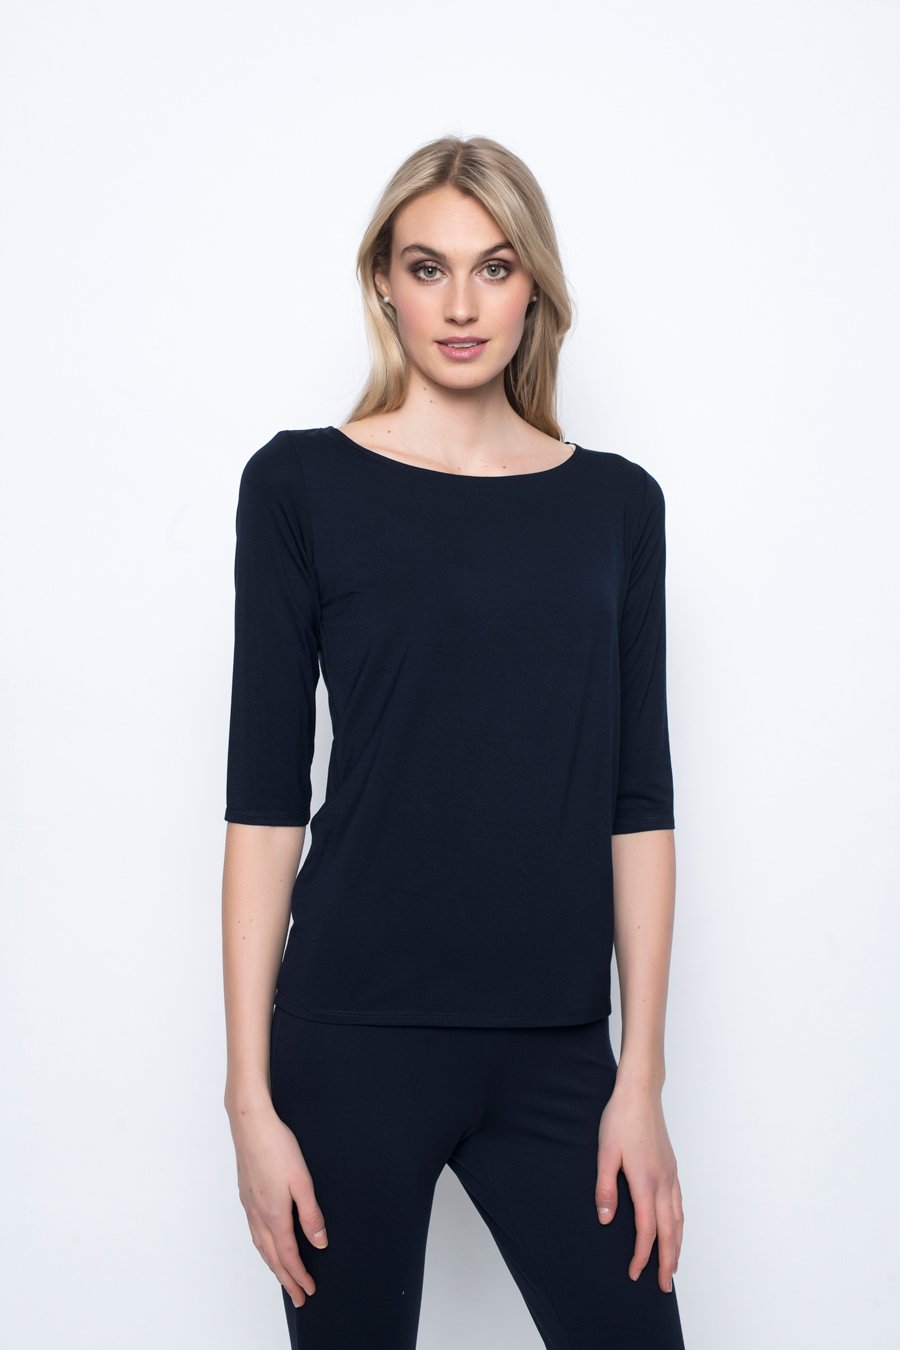 ¾ Sleeve Boat Neck Top, Picadilly Canada